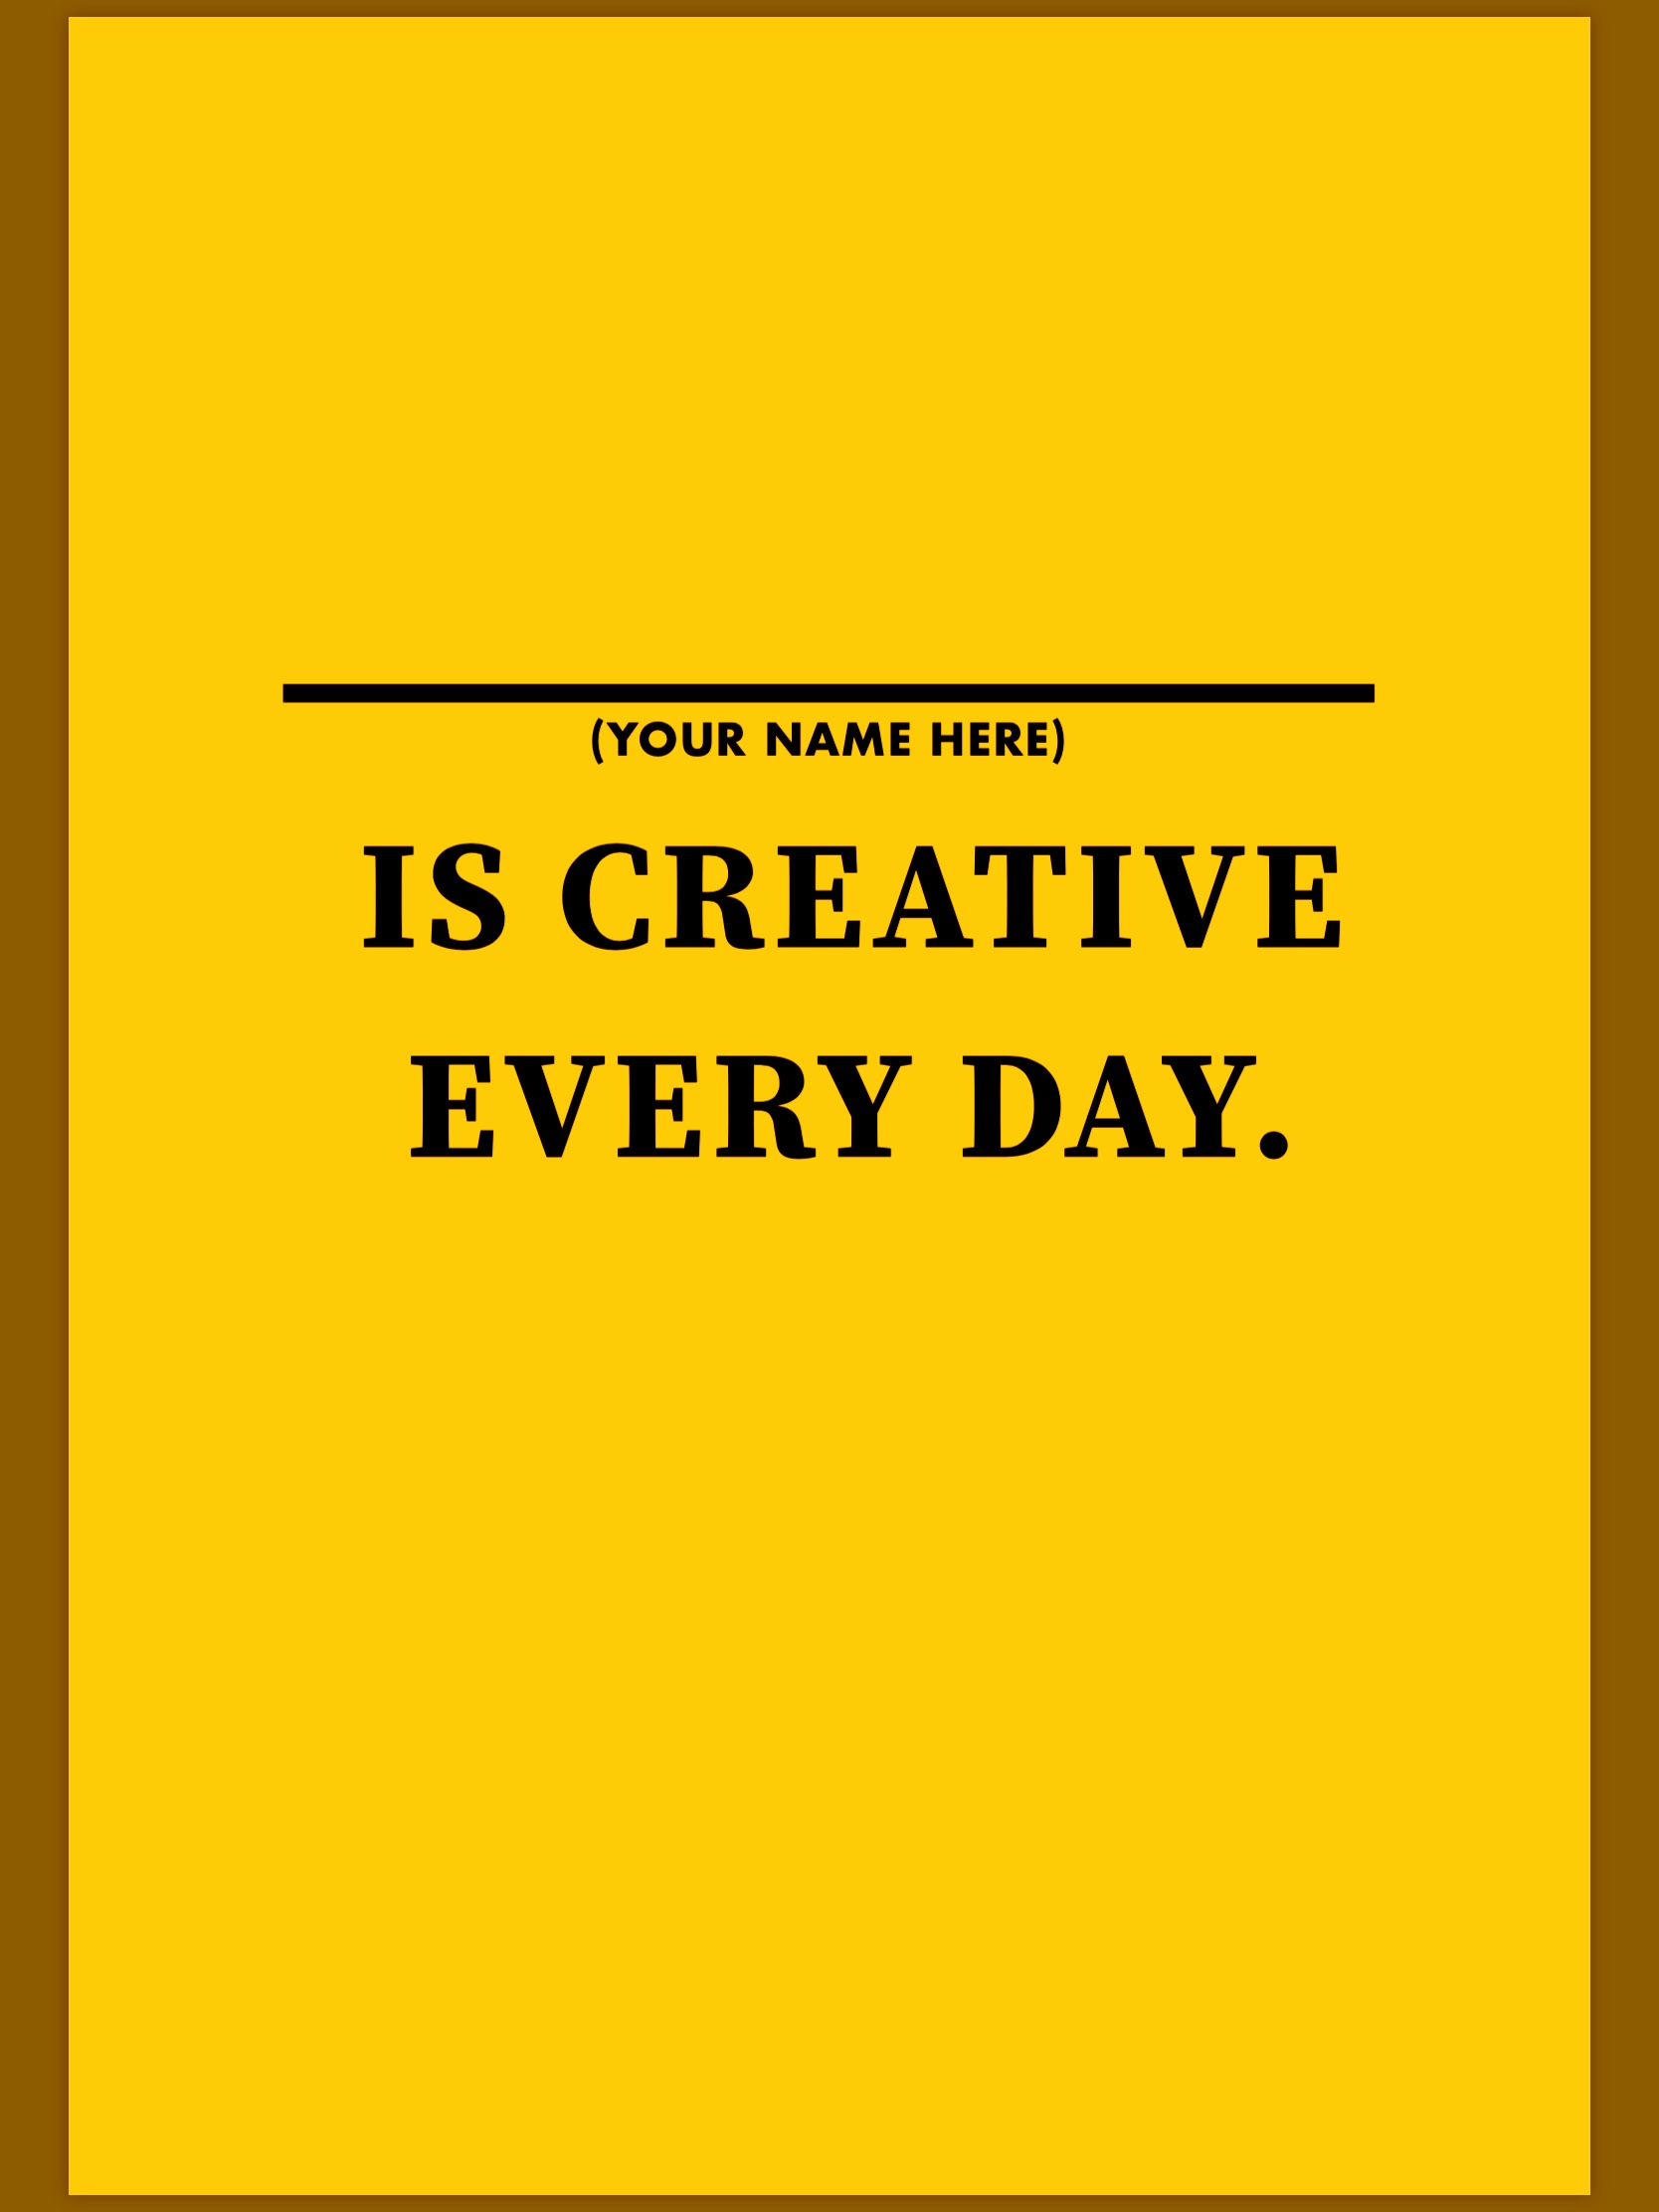 You are creative every day.